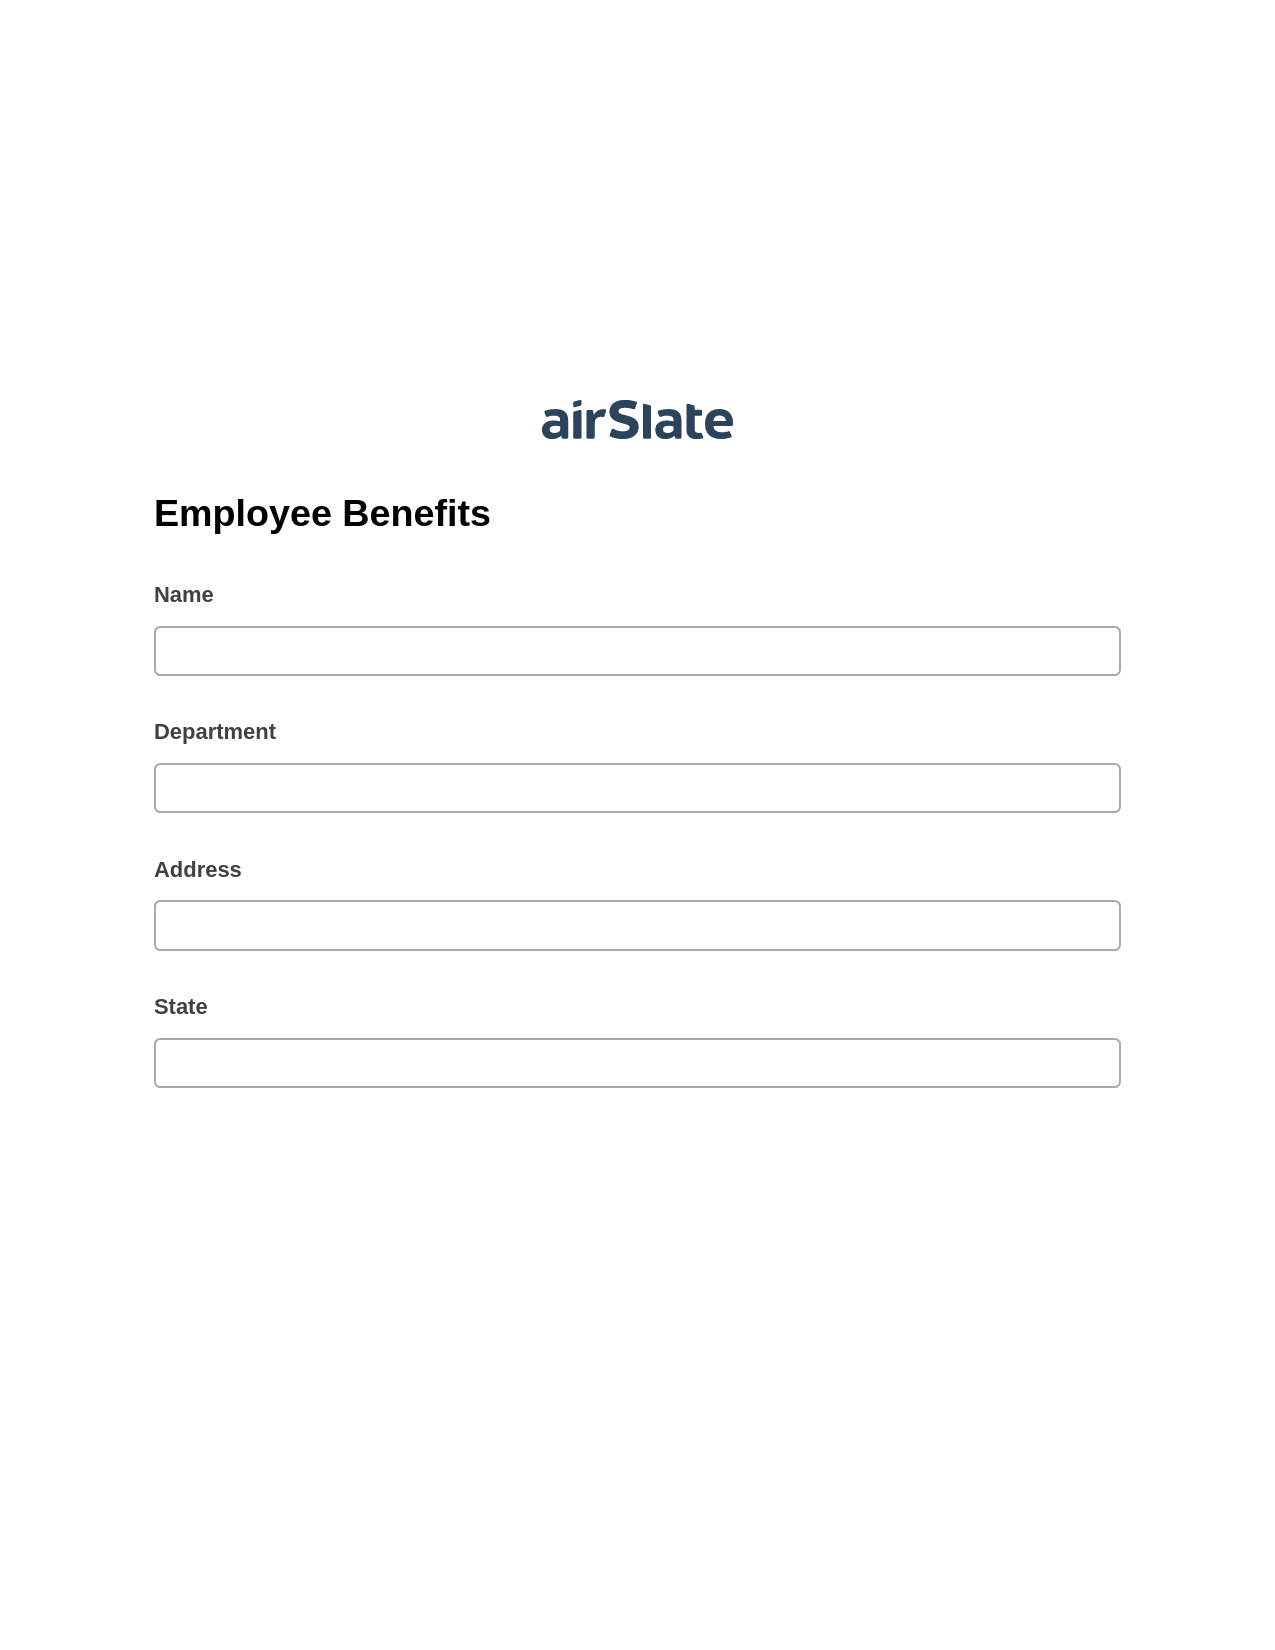 Employee Benefits Pre-fill from Salesforce Record Bot, Google Cloud Print Bot, Export to Excel 365 Bot